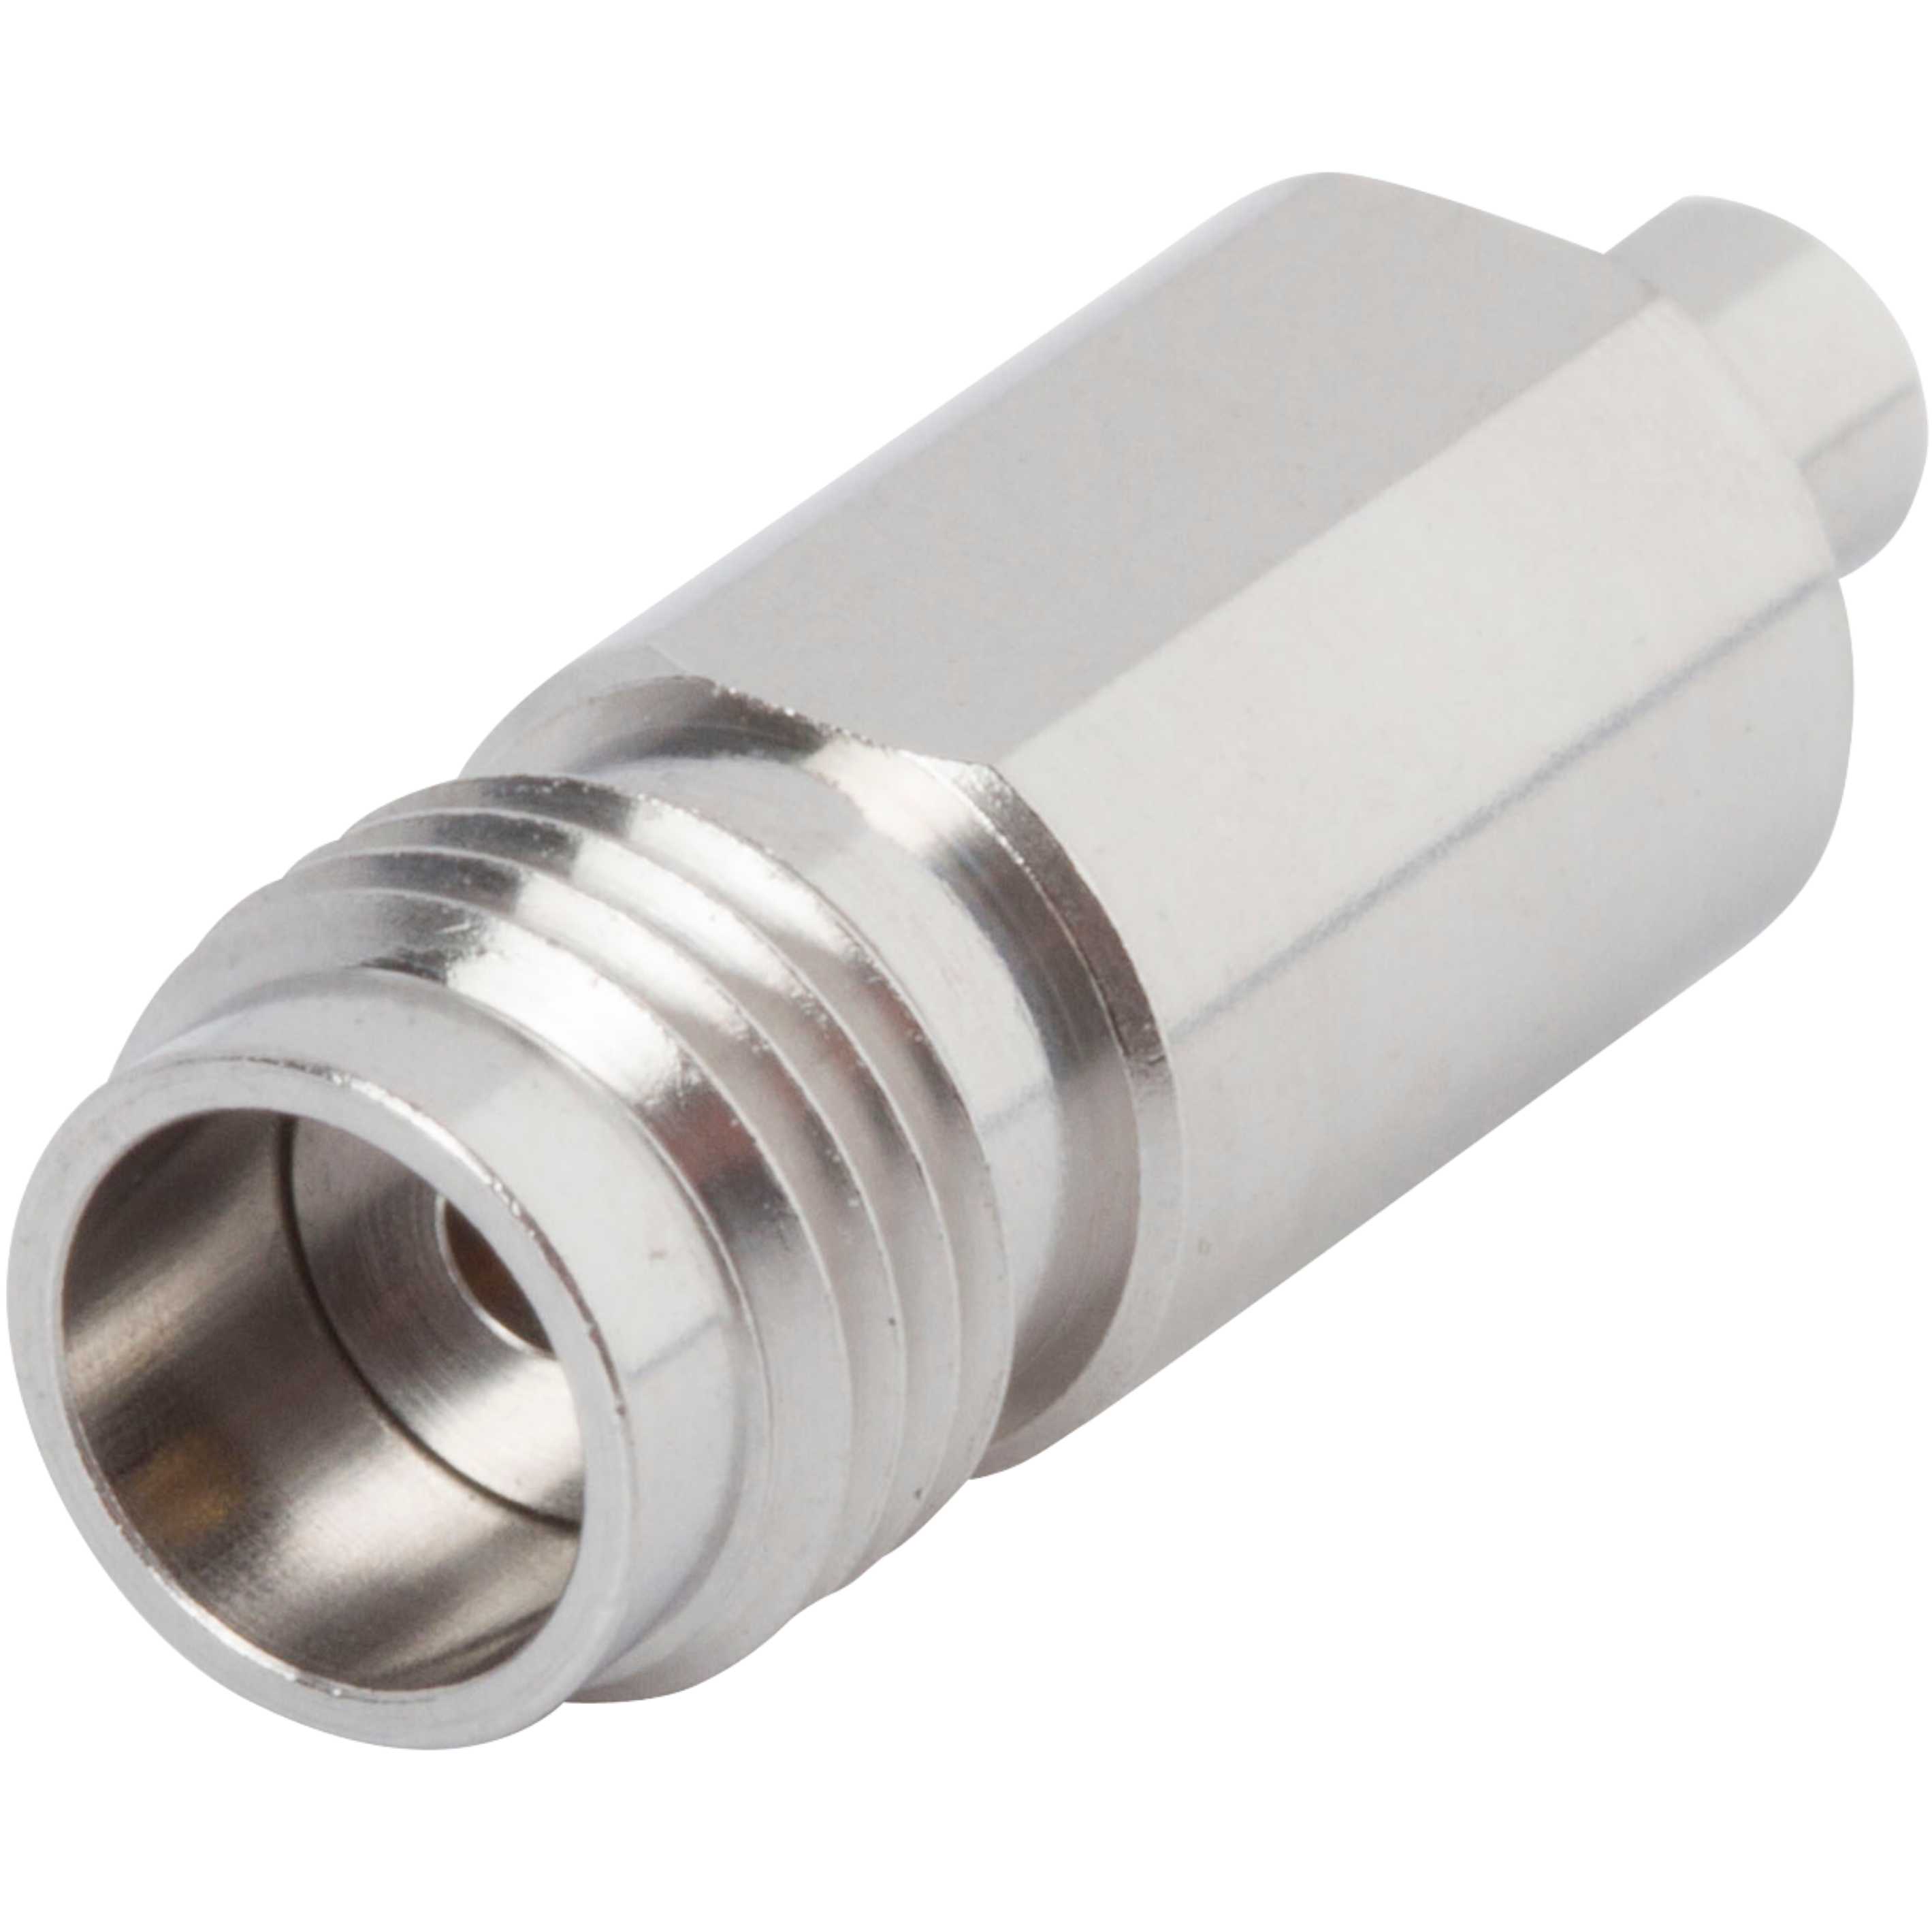 1.85mm Female to SMPM Male Adapter, SB, SF1132-6070